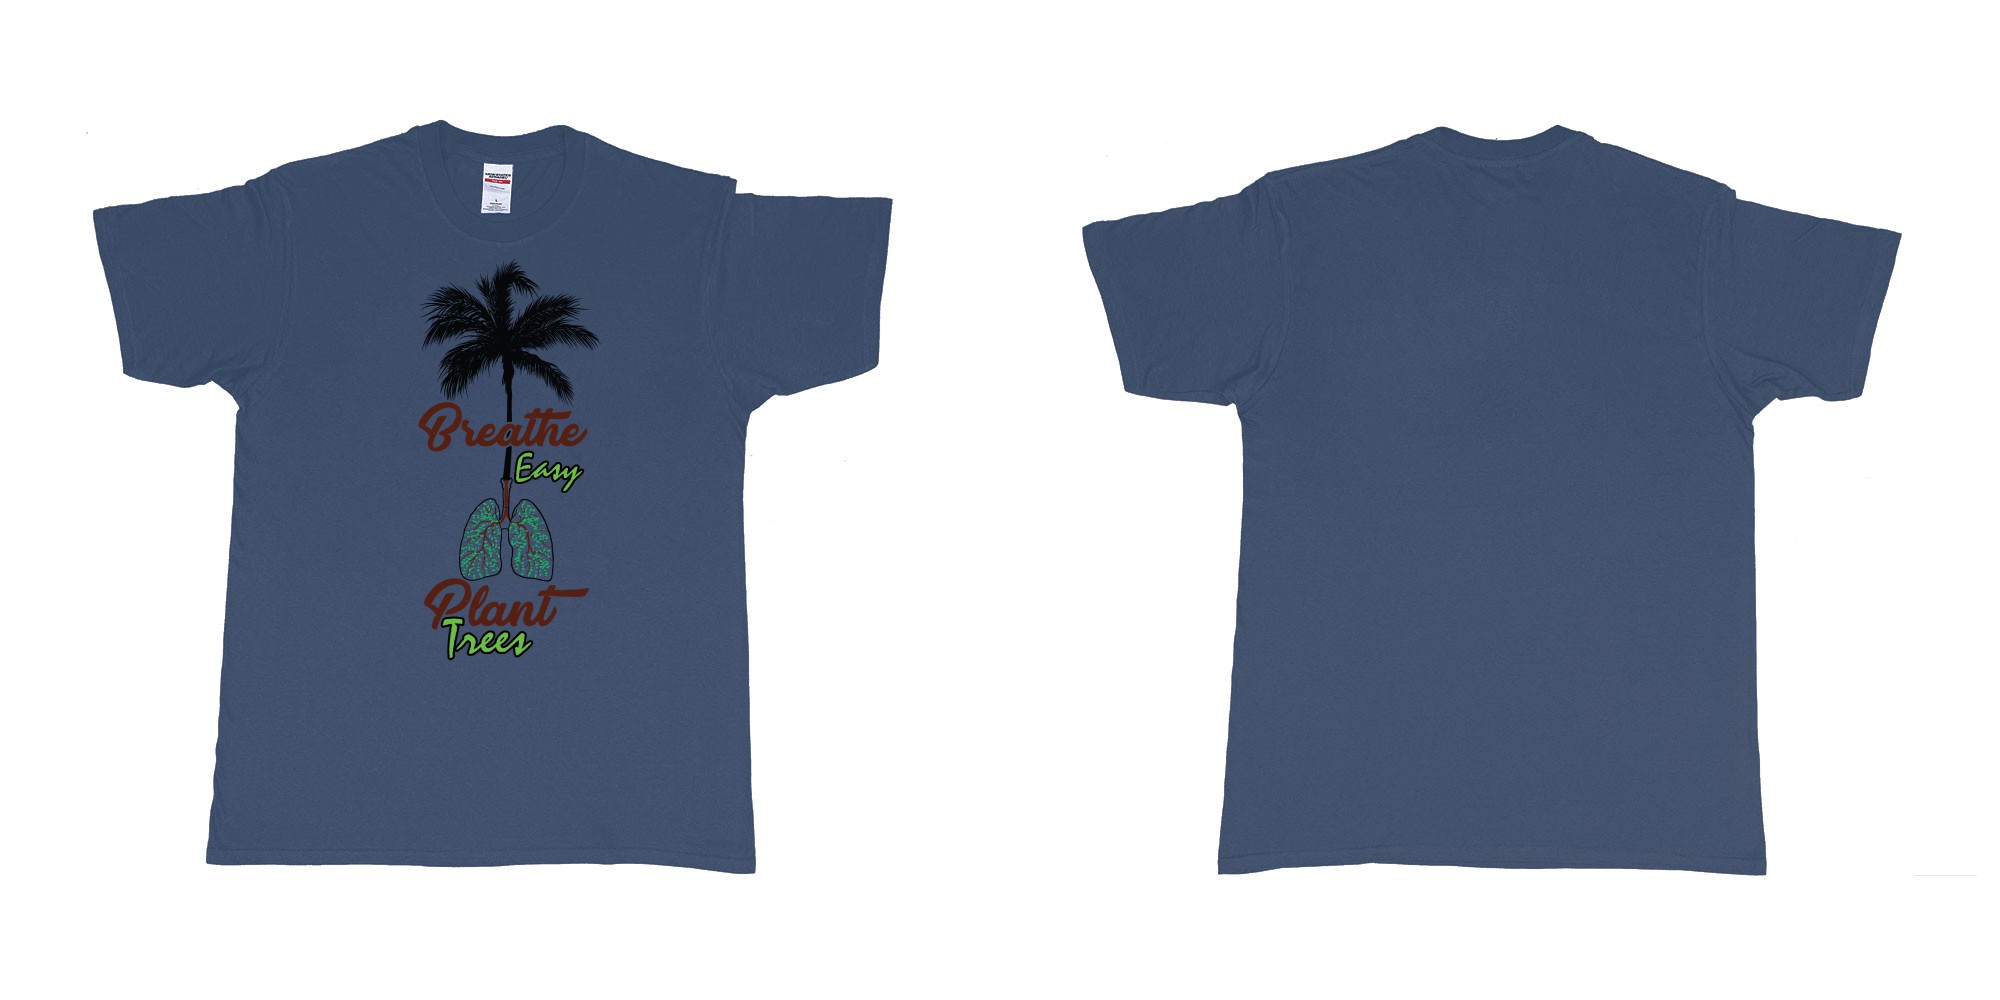 Custom tshirt design breathe easy and plant a tree for better air for everyone in fabric color navy choice your own text made in Bali by The Pirate Way